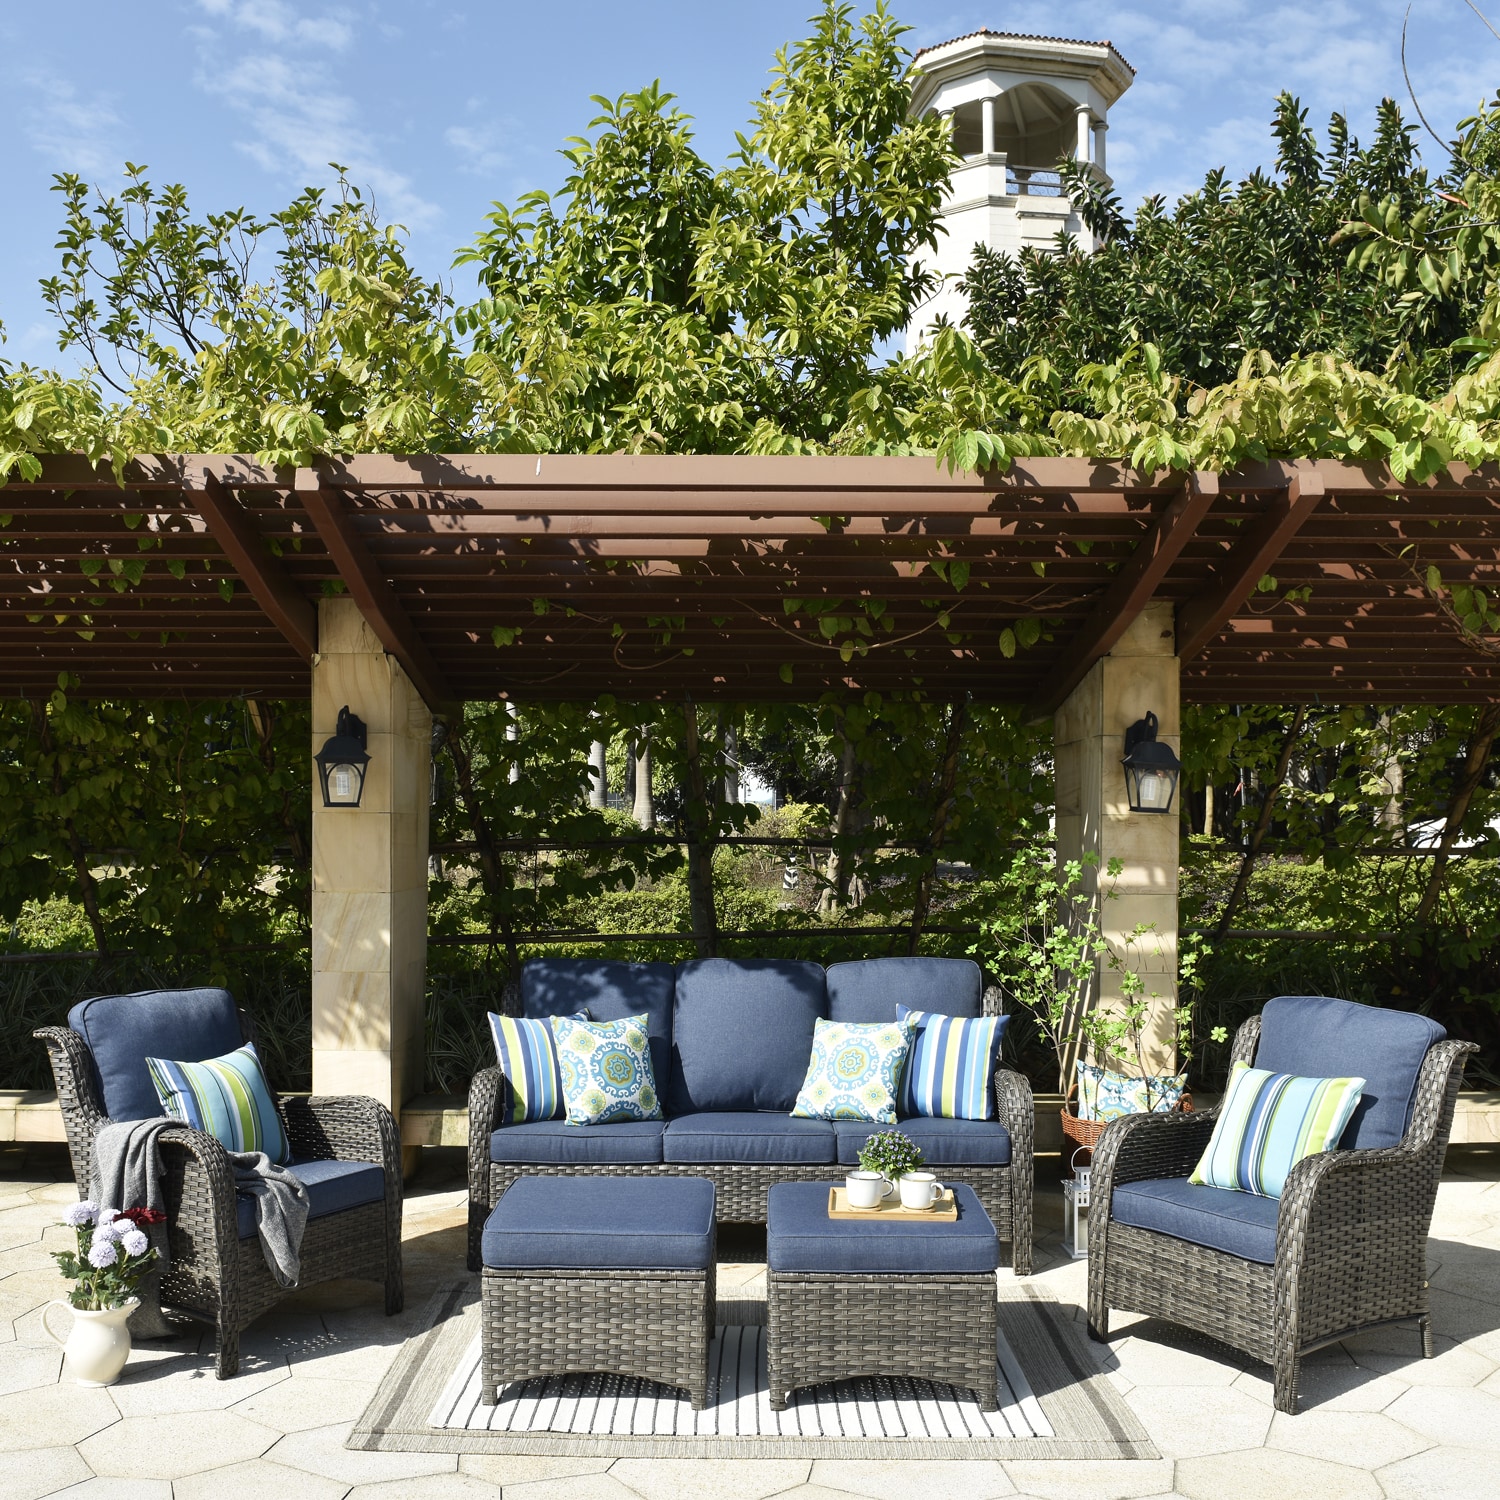 Ovios 5-Piece Rattan Patio Conversation Set with Cushions on Sale At Lowe's